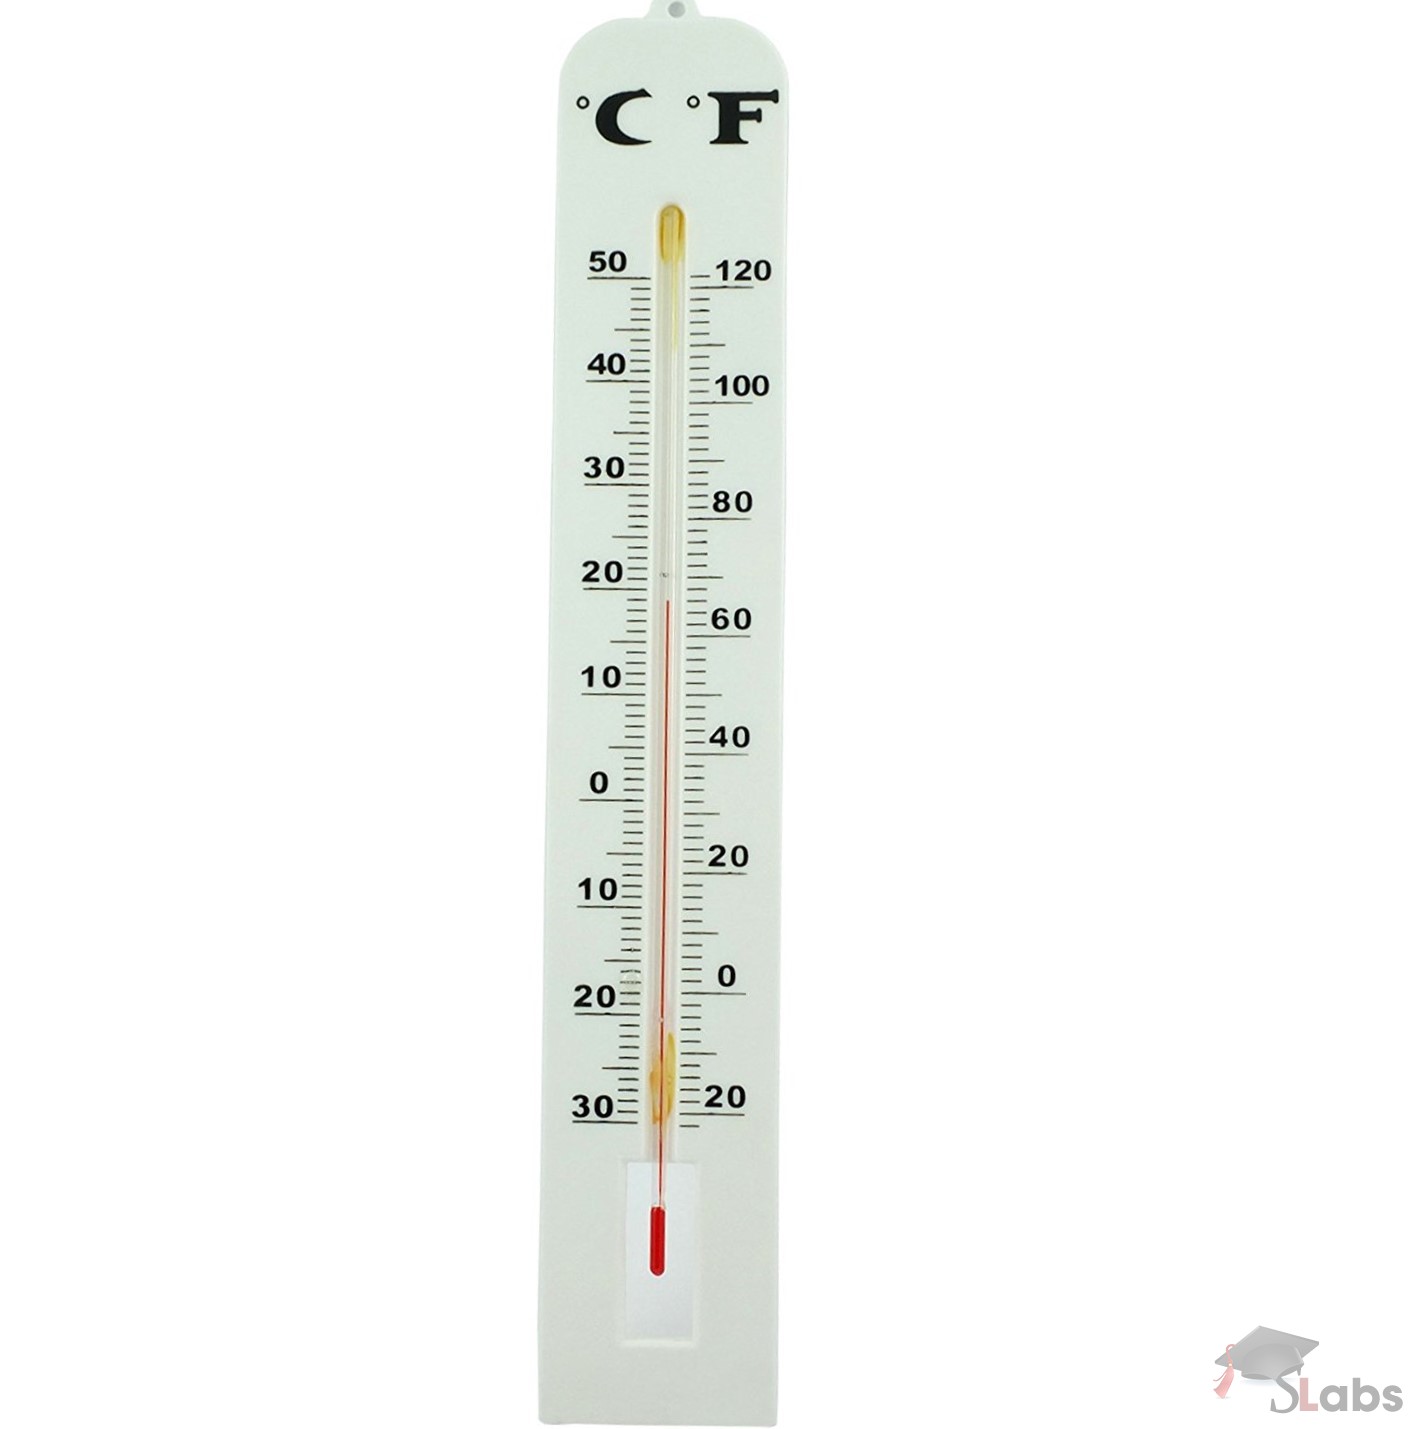 http://www.scholarslabs.com/wp-content/uploads/Wall-Thermometer.jpg